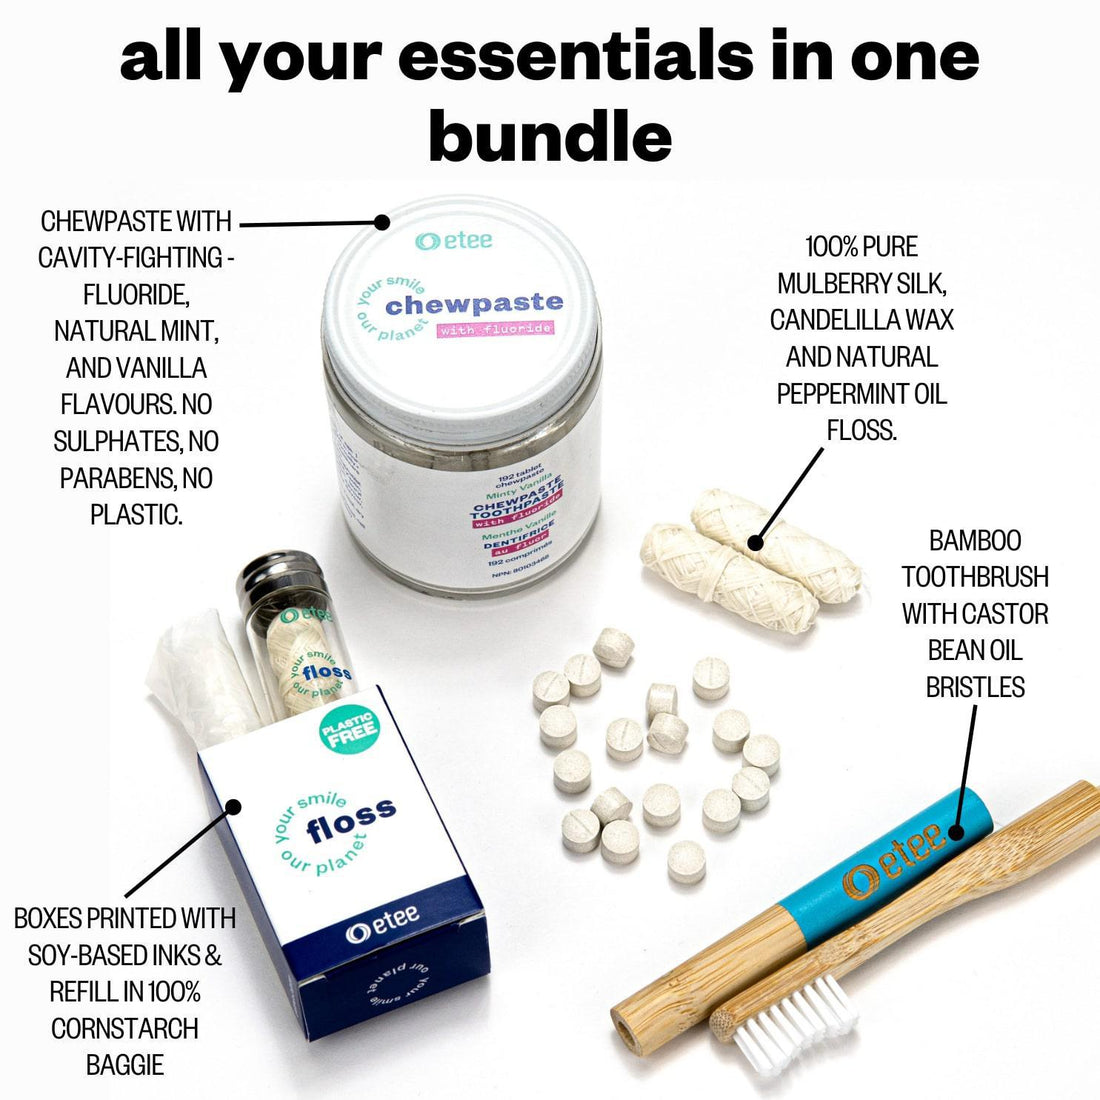 Infographic for etee's dental care kit - fluoride with the text "chewpaste with cavity fighting fluoride, 100% pure mulberry silk dental floss, bamboo toothbrush with castor bean oil bristles and boxes printed with soy-based inks and refills in 100% cornstarch baggie"